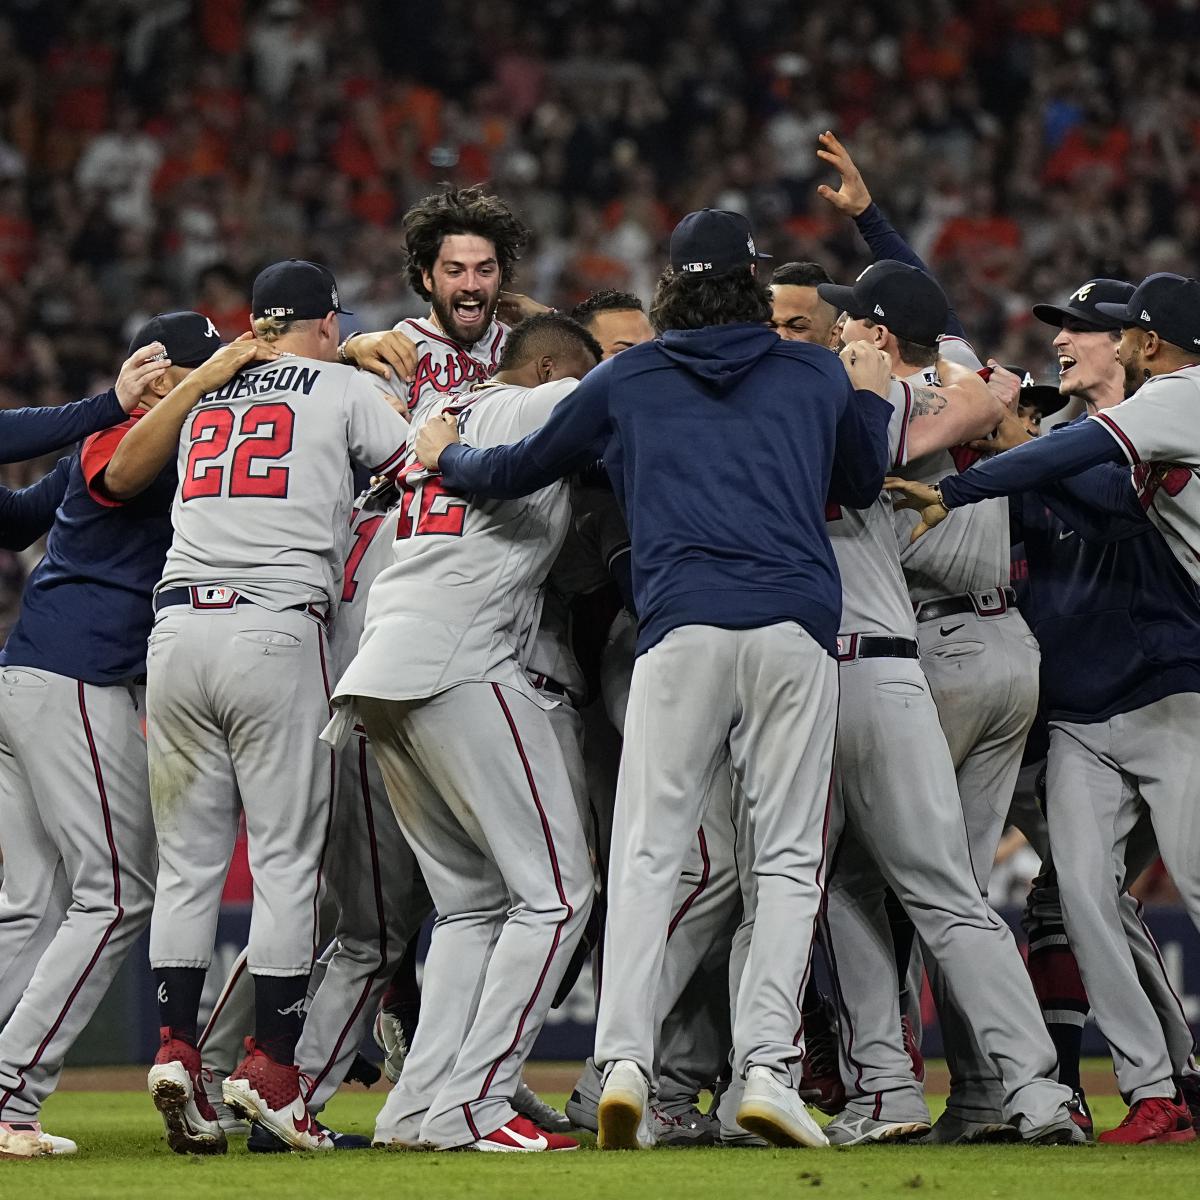 Rejoice Braves fans, the World Series championship is real - Battery Power